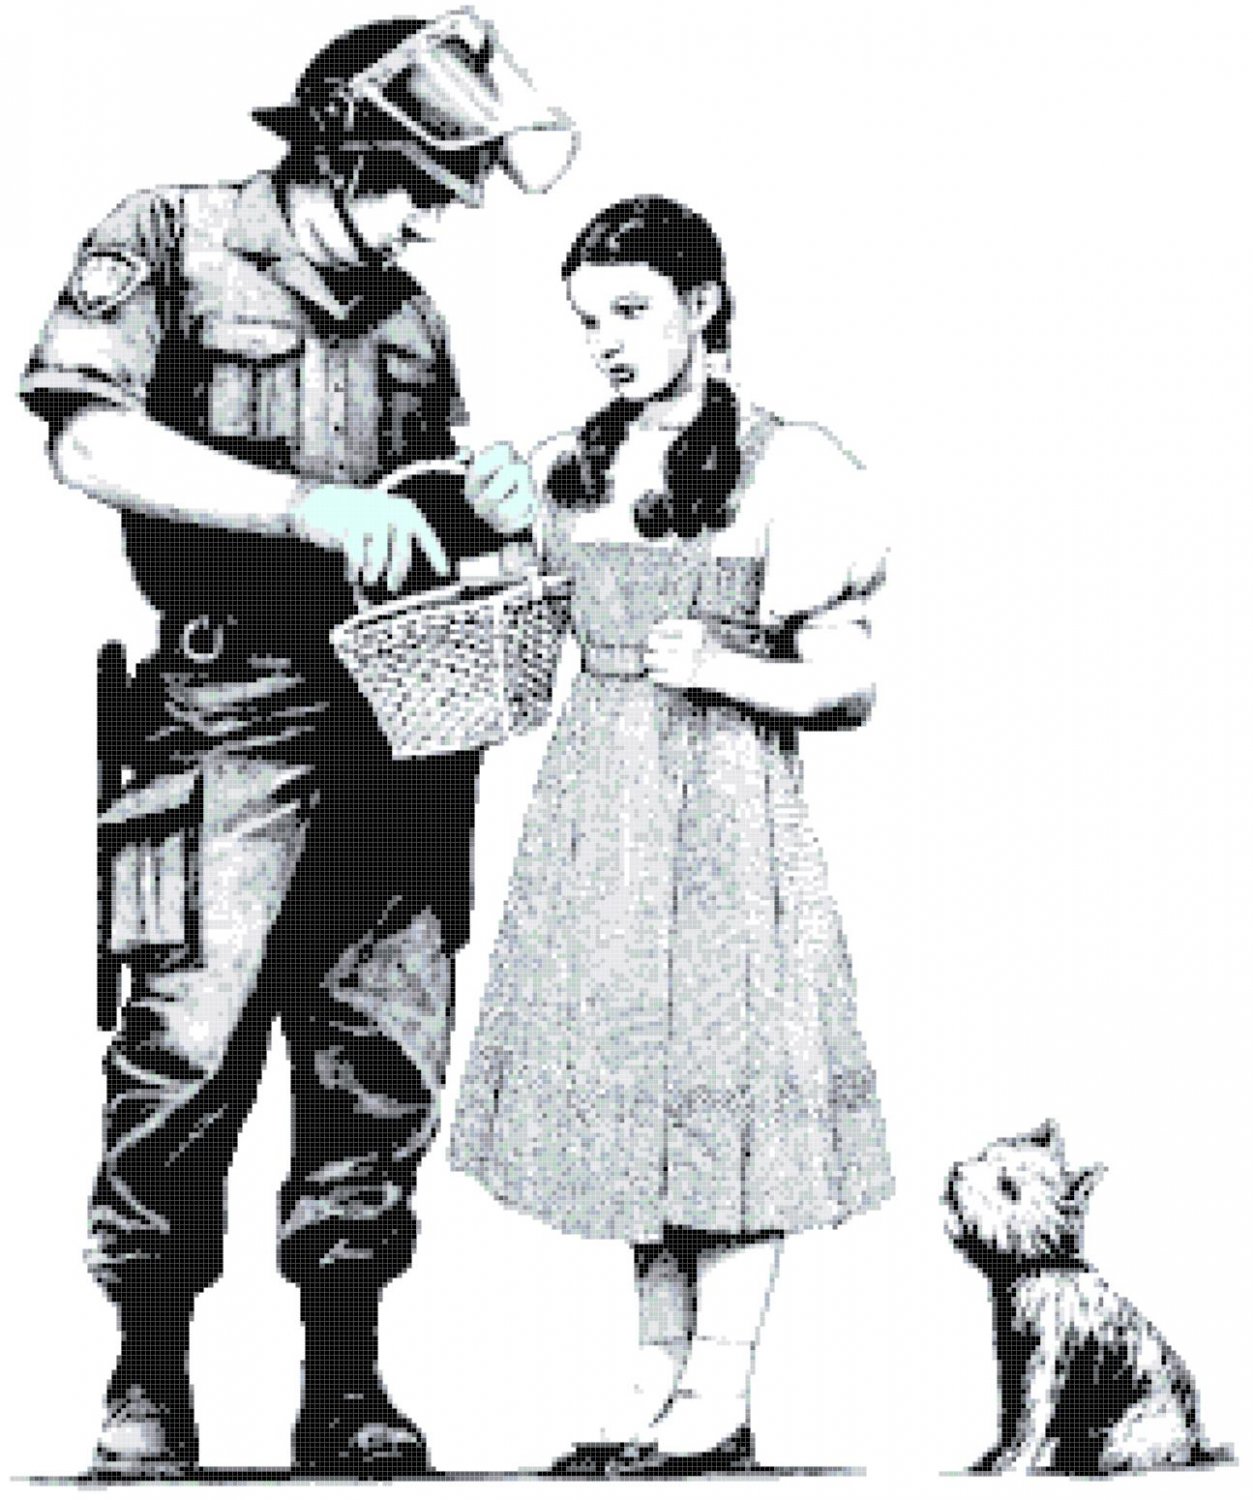 Counted Cross Stitch pattern banksy alice with policeman 254*307 stitches E2270